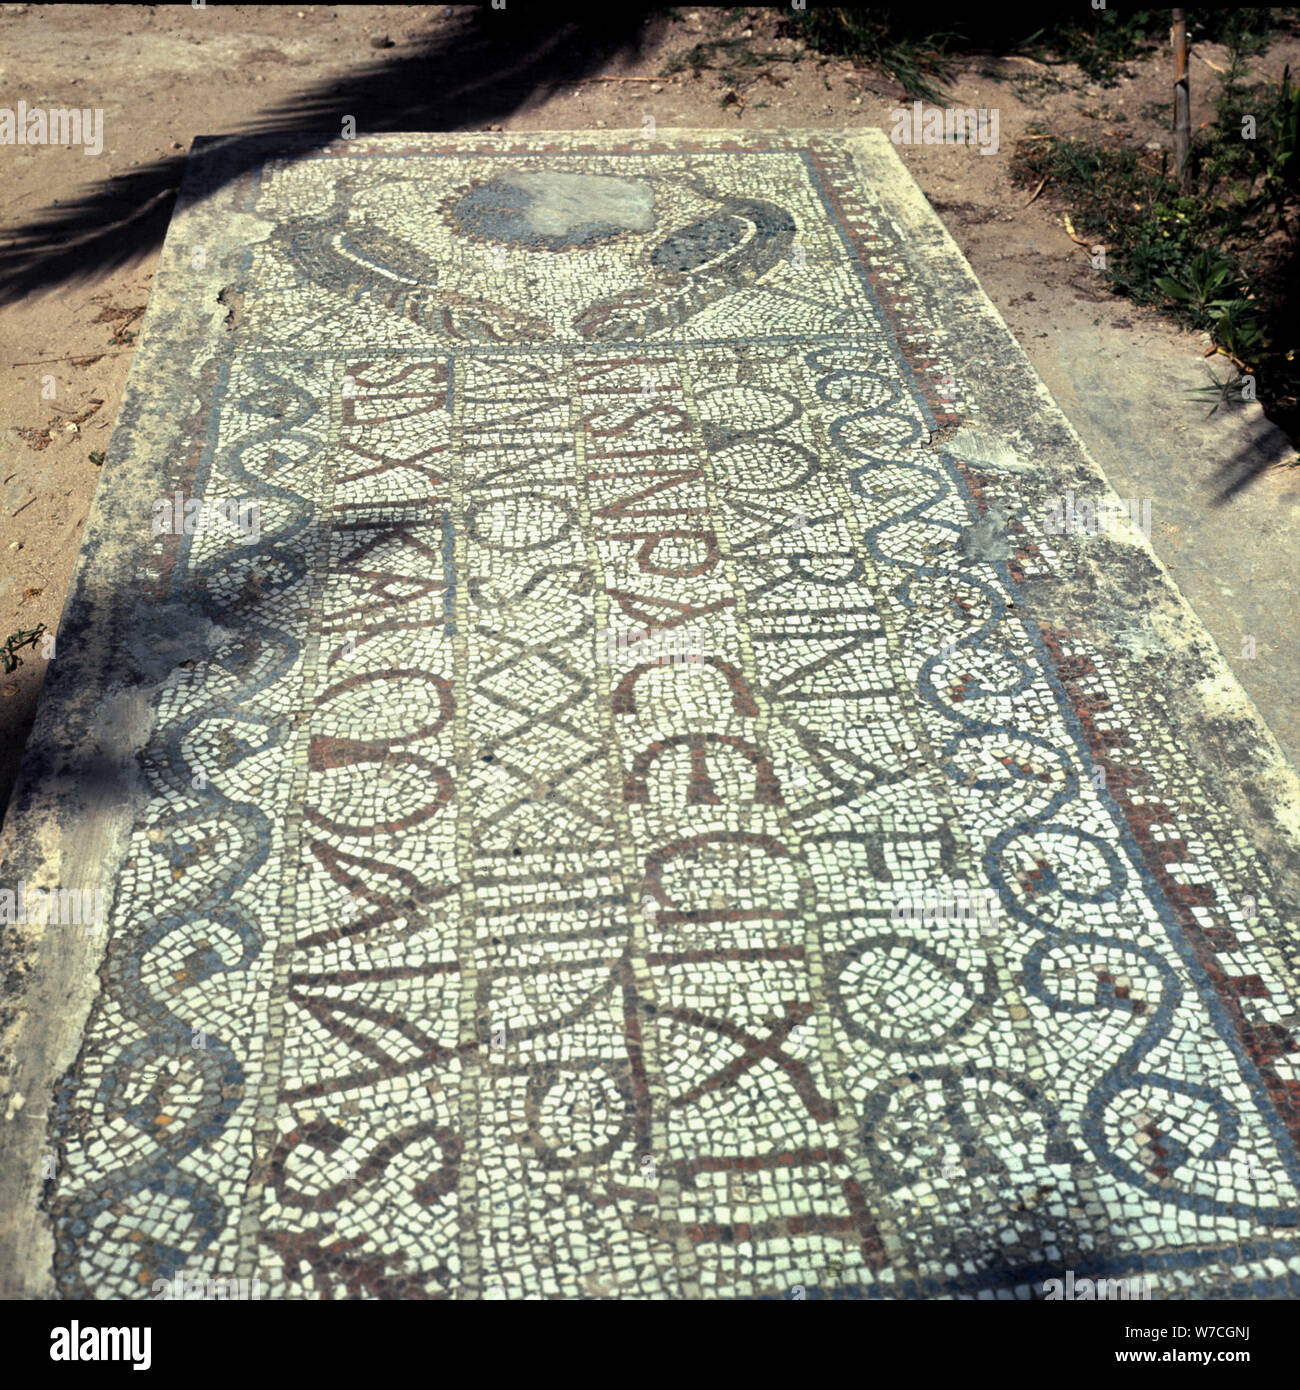 Mosaic preserved in the ruins of Carthage in Tunisia. Stock Photo